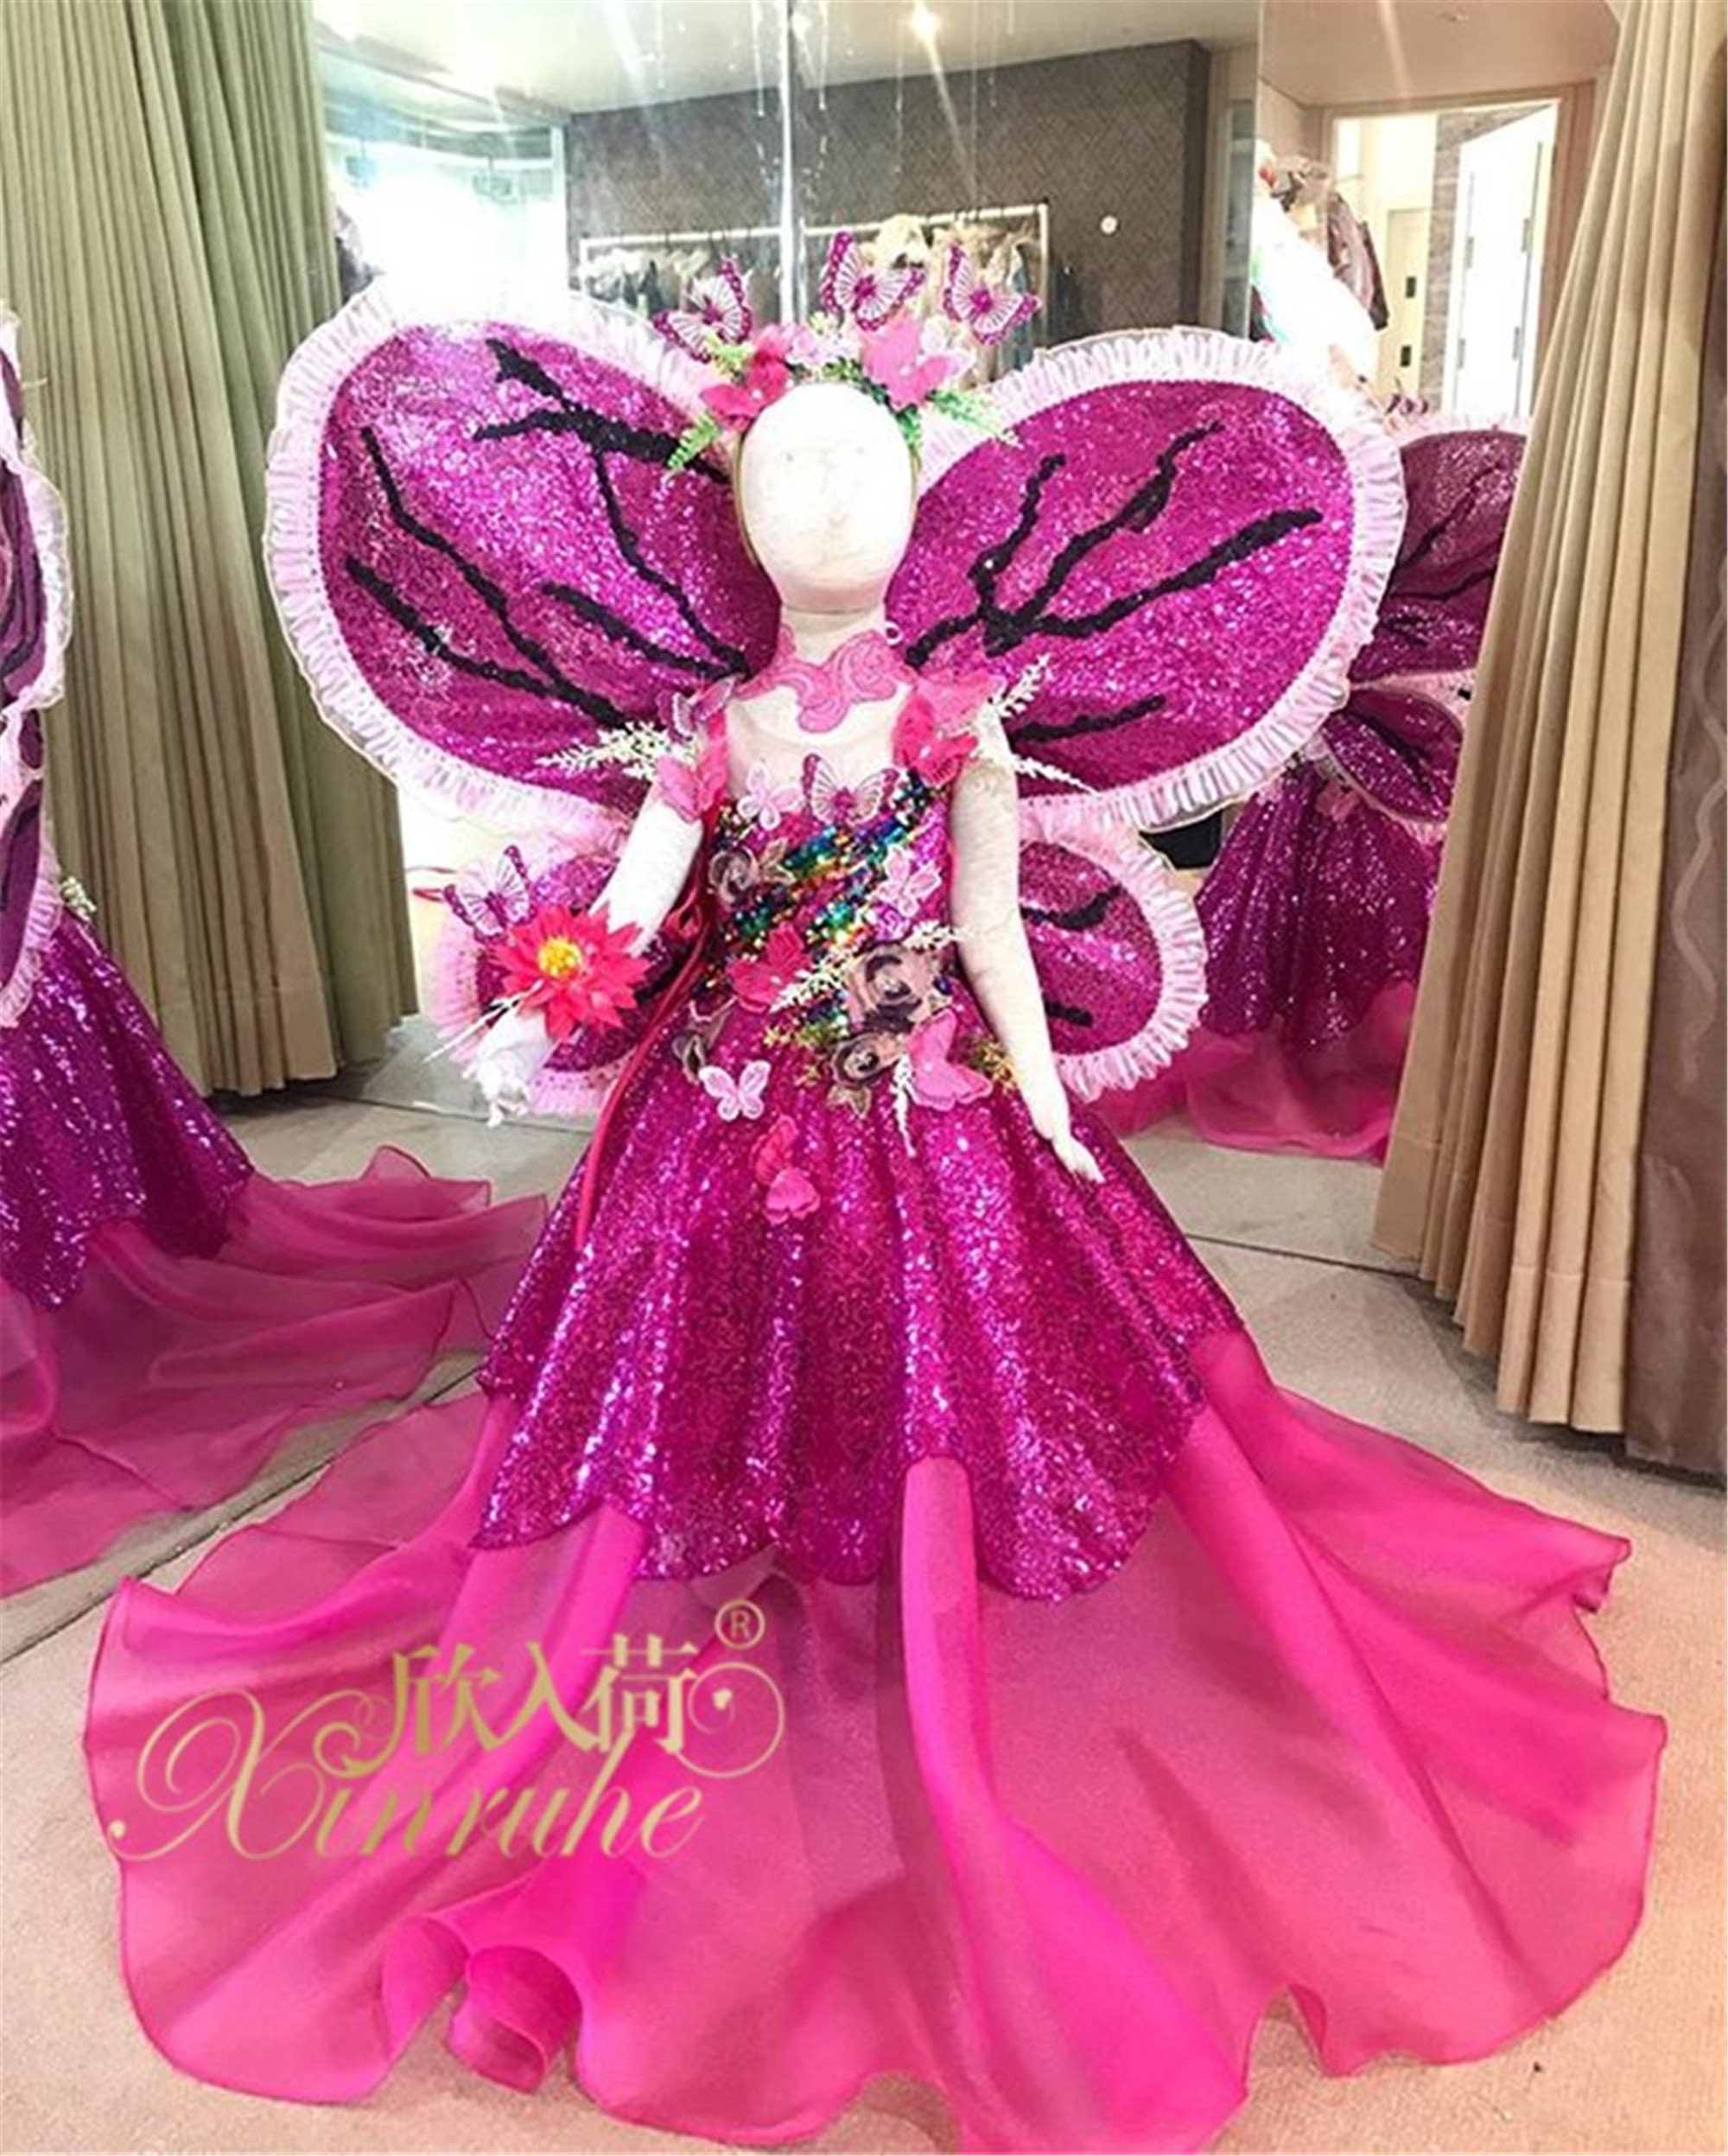 Gold Butterfly Dress with Fairy Wings | FREE SHIPPING | A DODSON'S